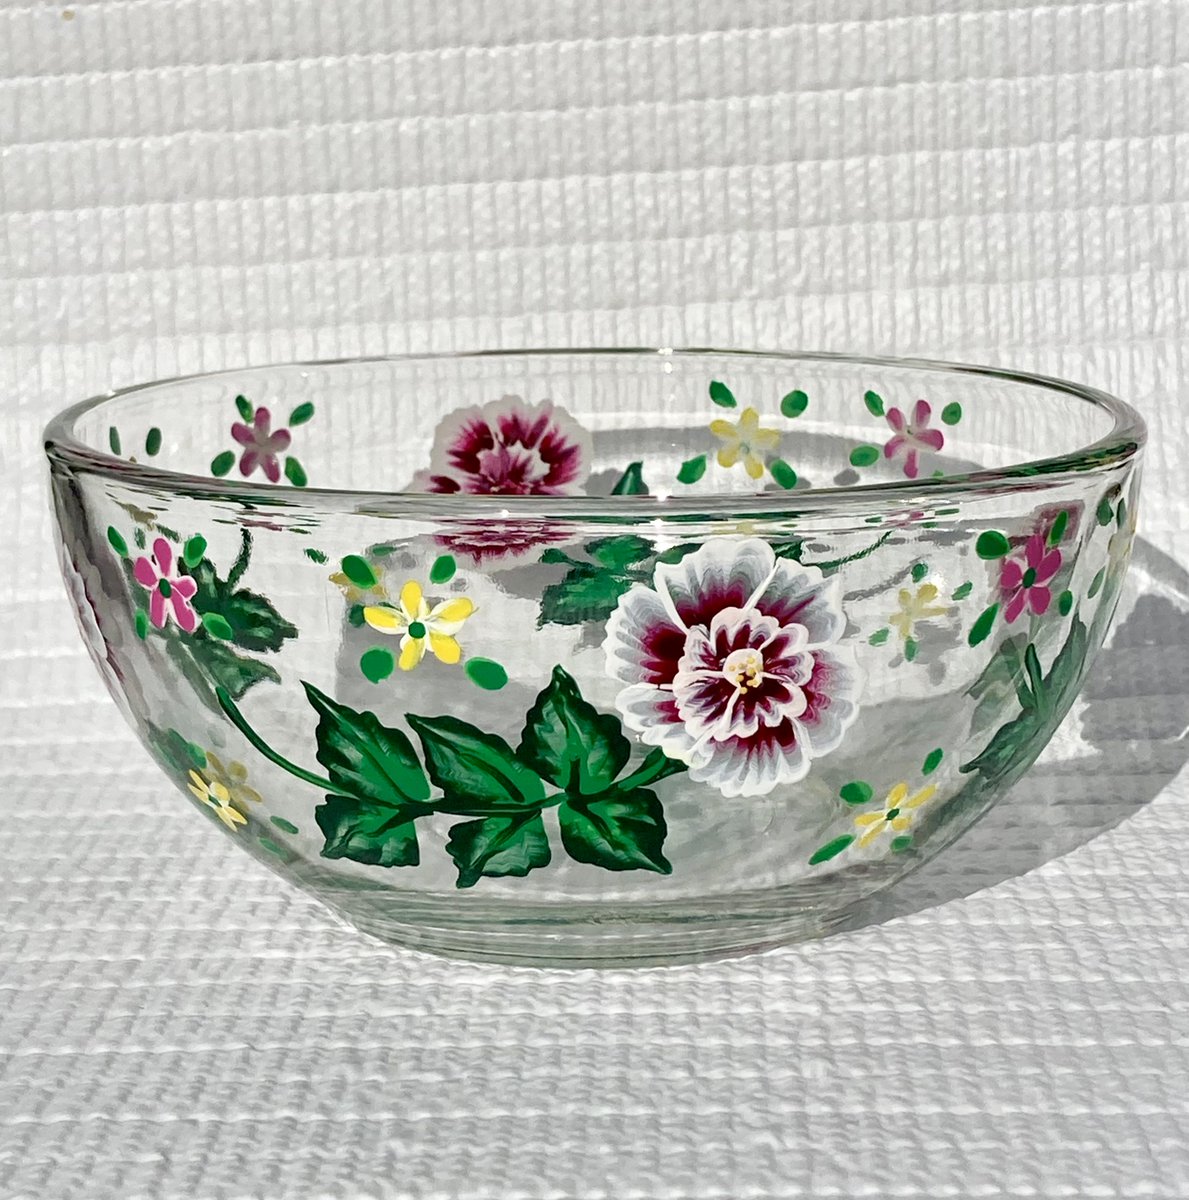 Check out this candy dish etsy.com/listing/163209… #candydish #floralbowl #homedecor #SMILEtt23 #CraftBizParty #etsy #etsystore